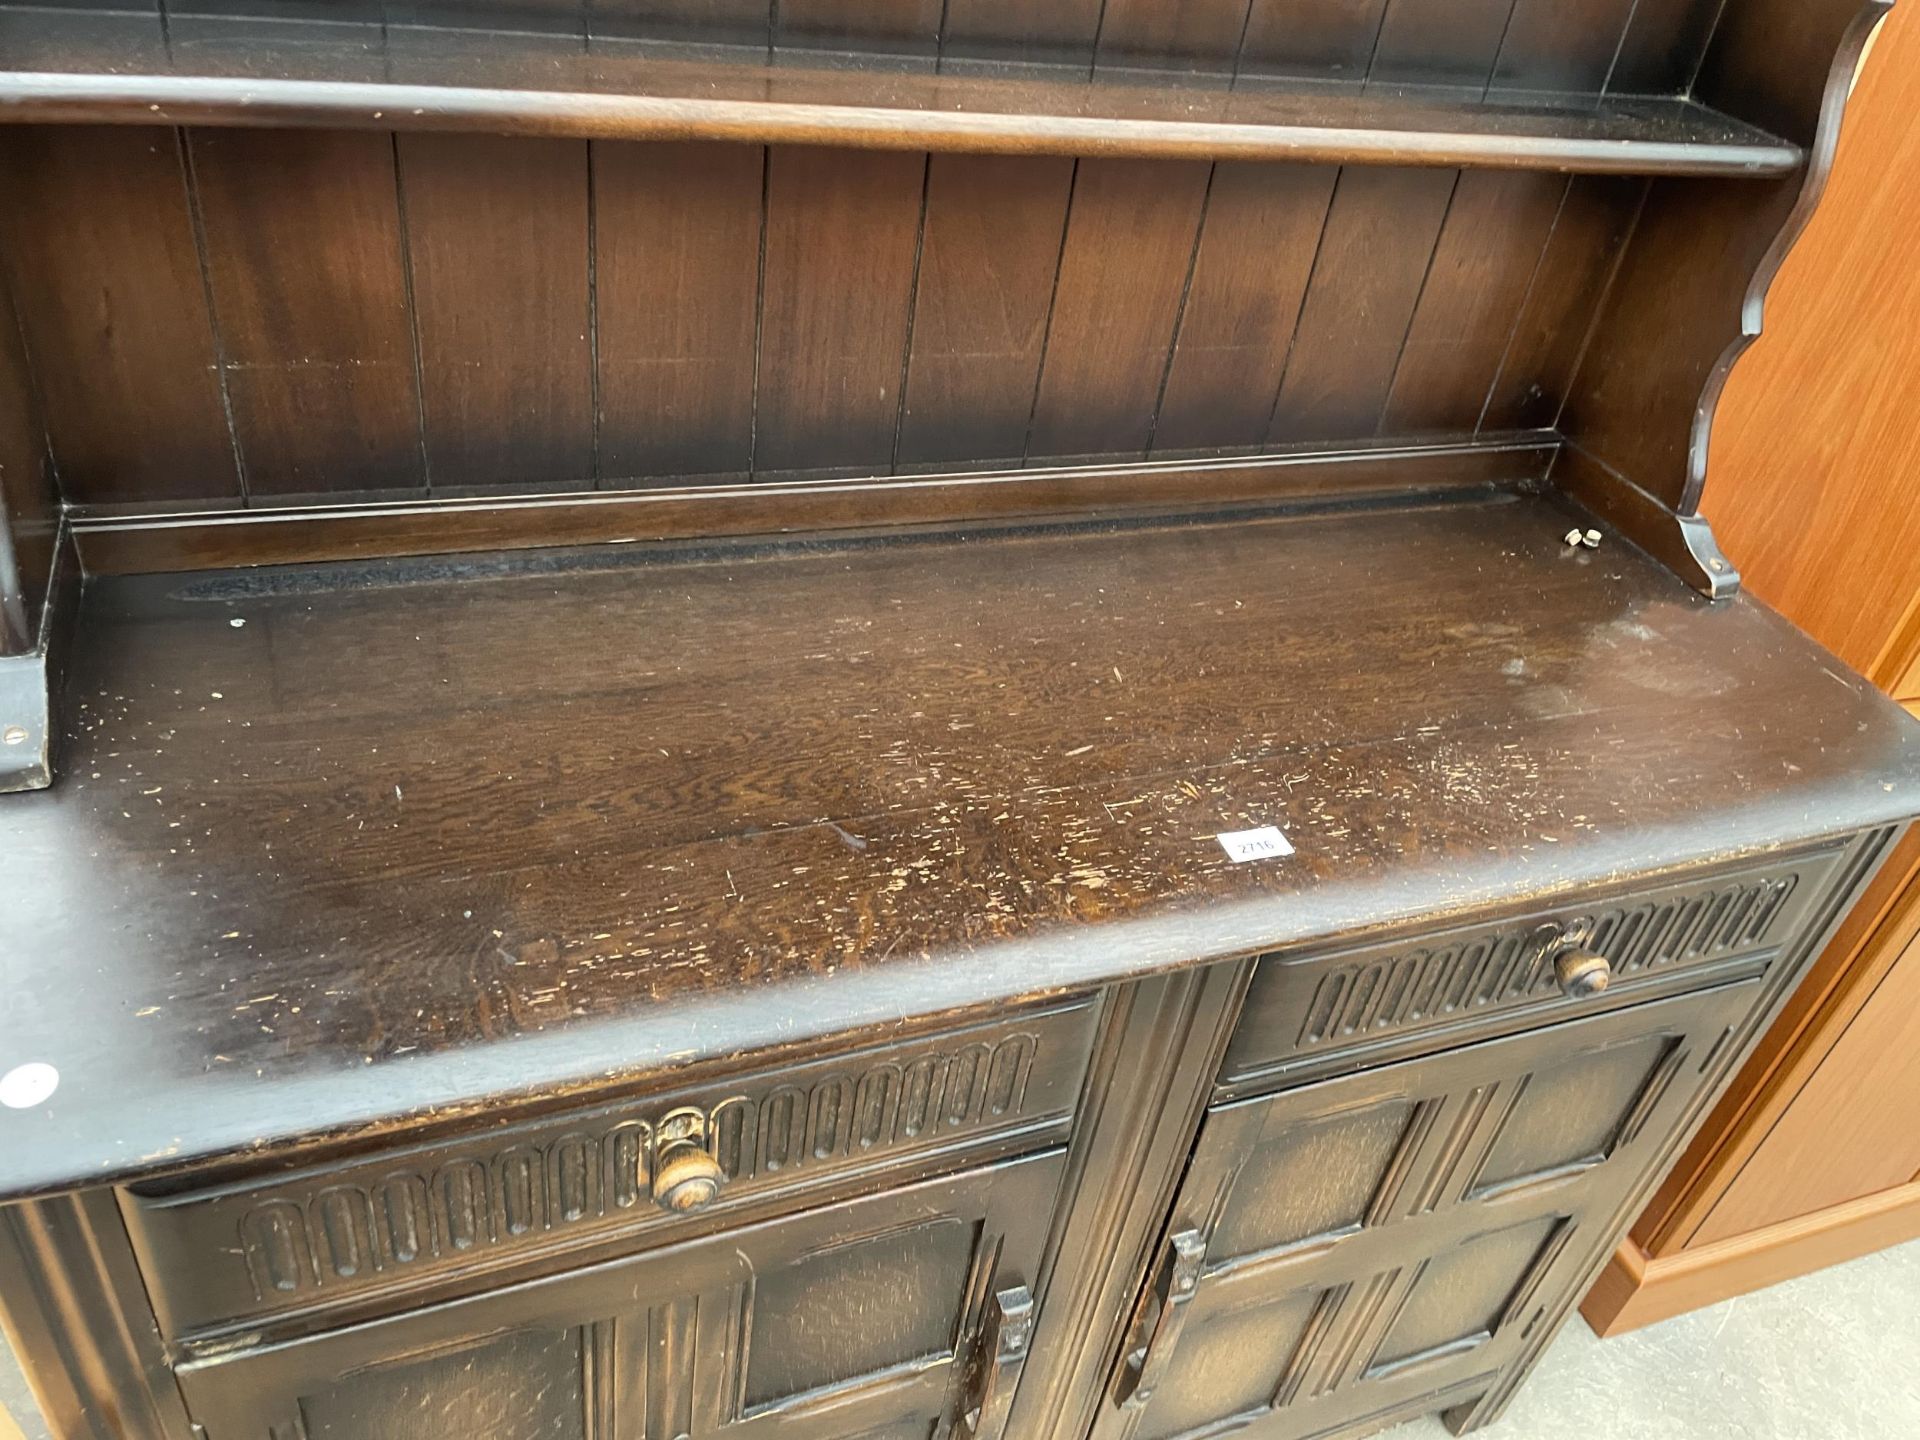 A REPRODUCTION OAK DRESSER COMPLETE WITH PLATE RACK, 48" WIDE - Image 3 of 4